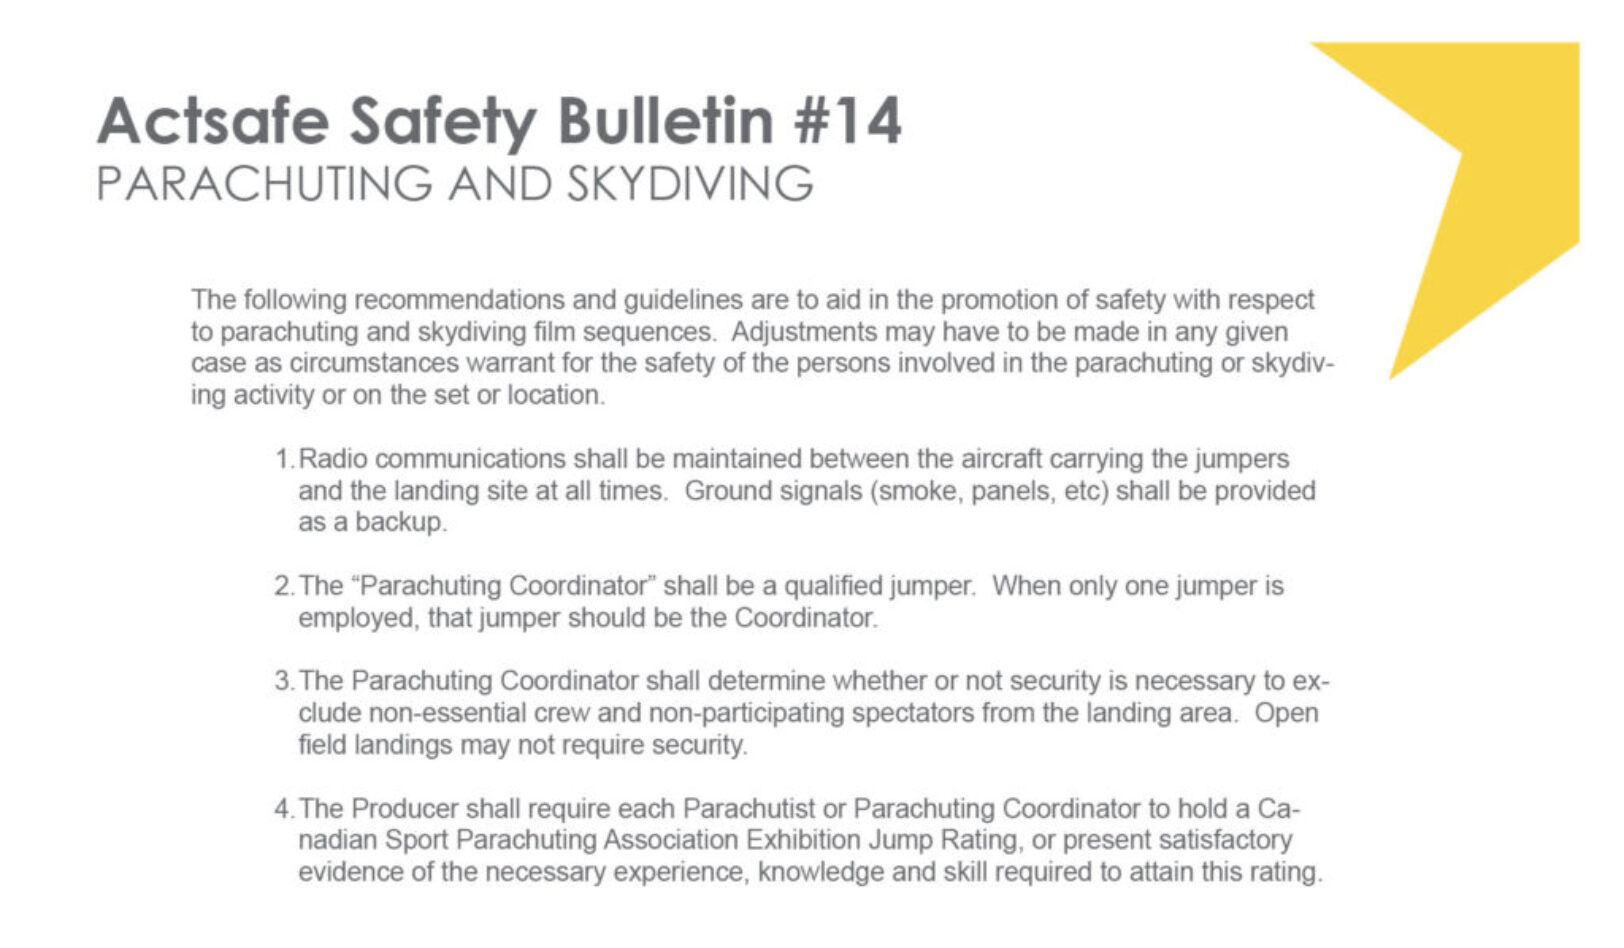 #14 Parachuting and Skydiving Motion Picture Safety Bulletin